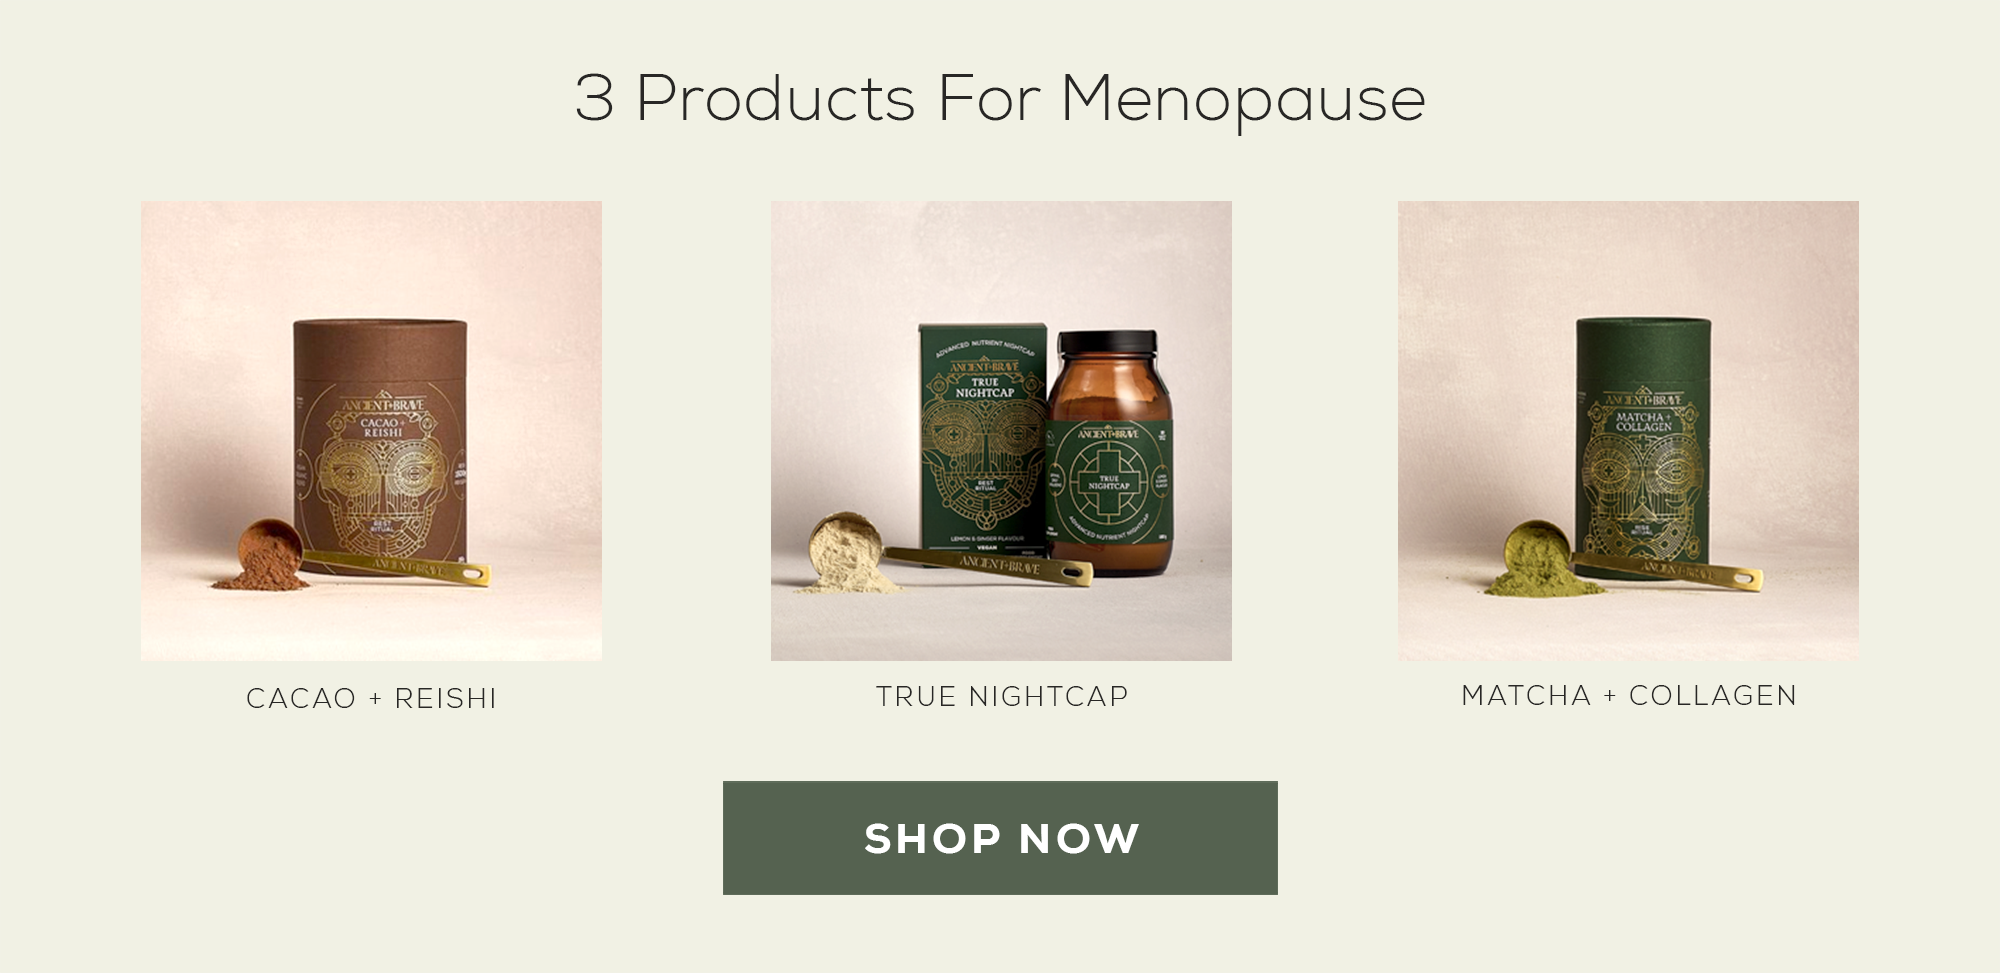 3 products to support menopause